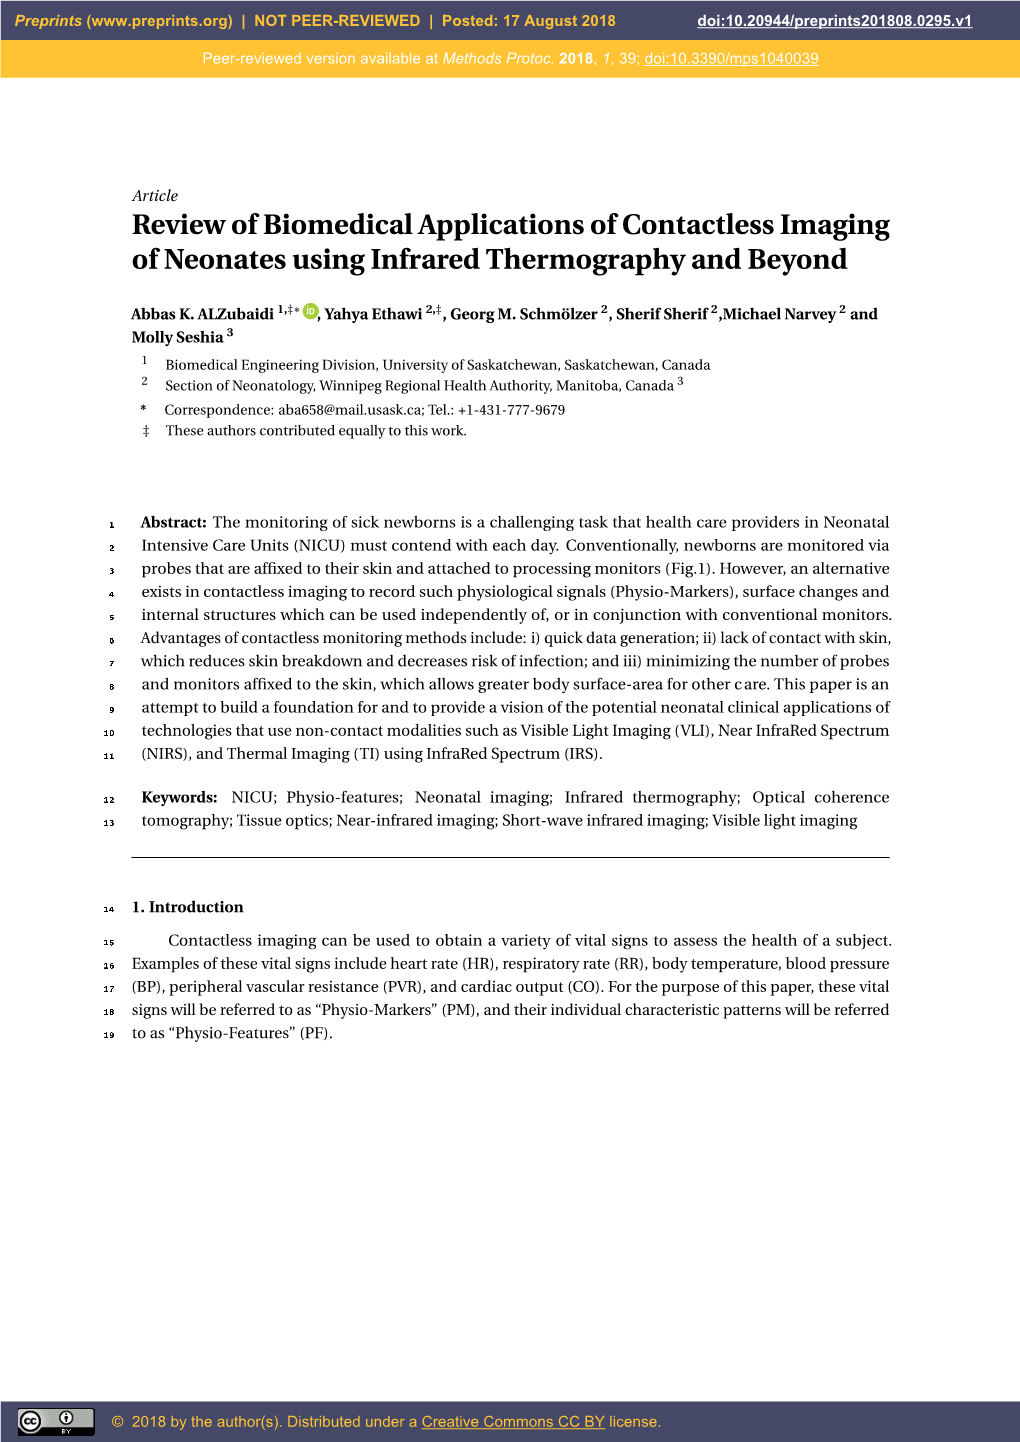 Review of Biomedical Applications of Contactless Imaging of Neonates Using Infrared Thermography and Beyond